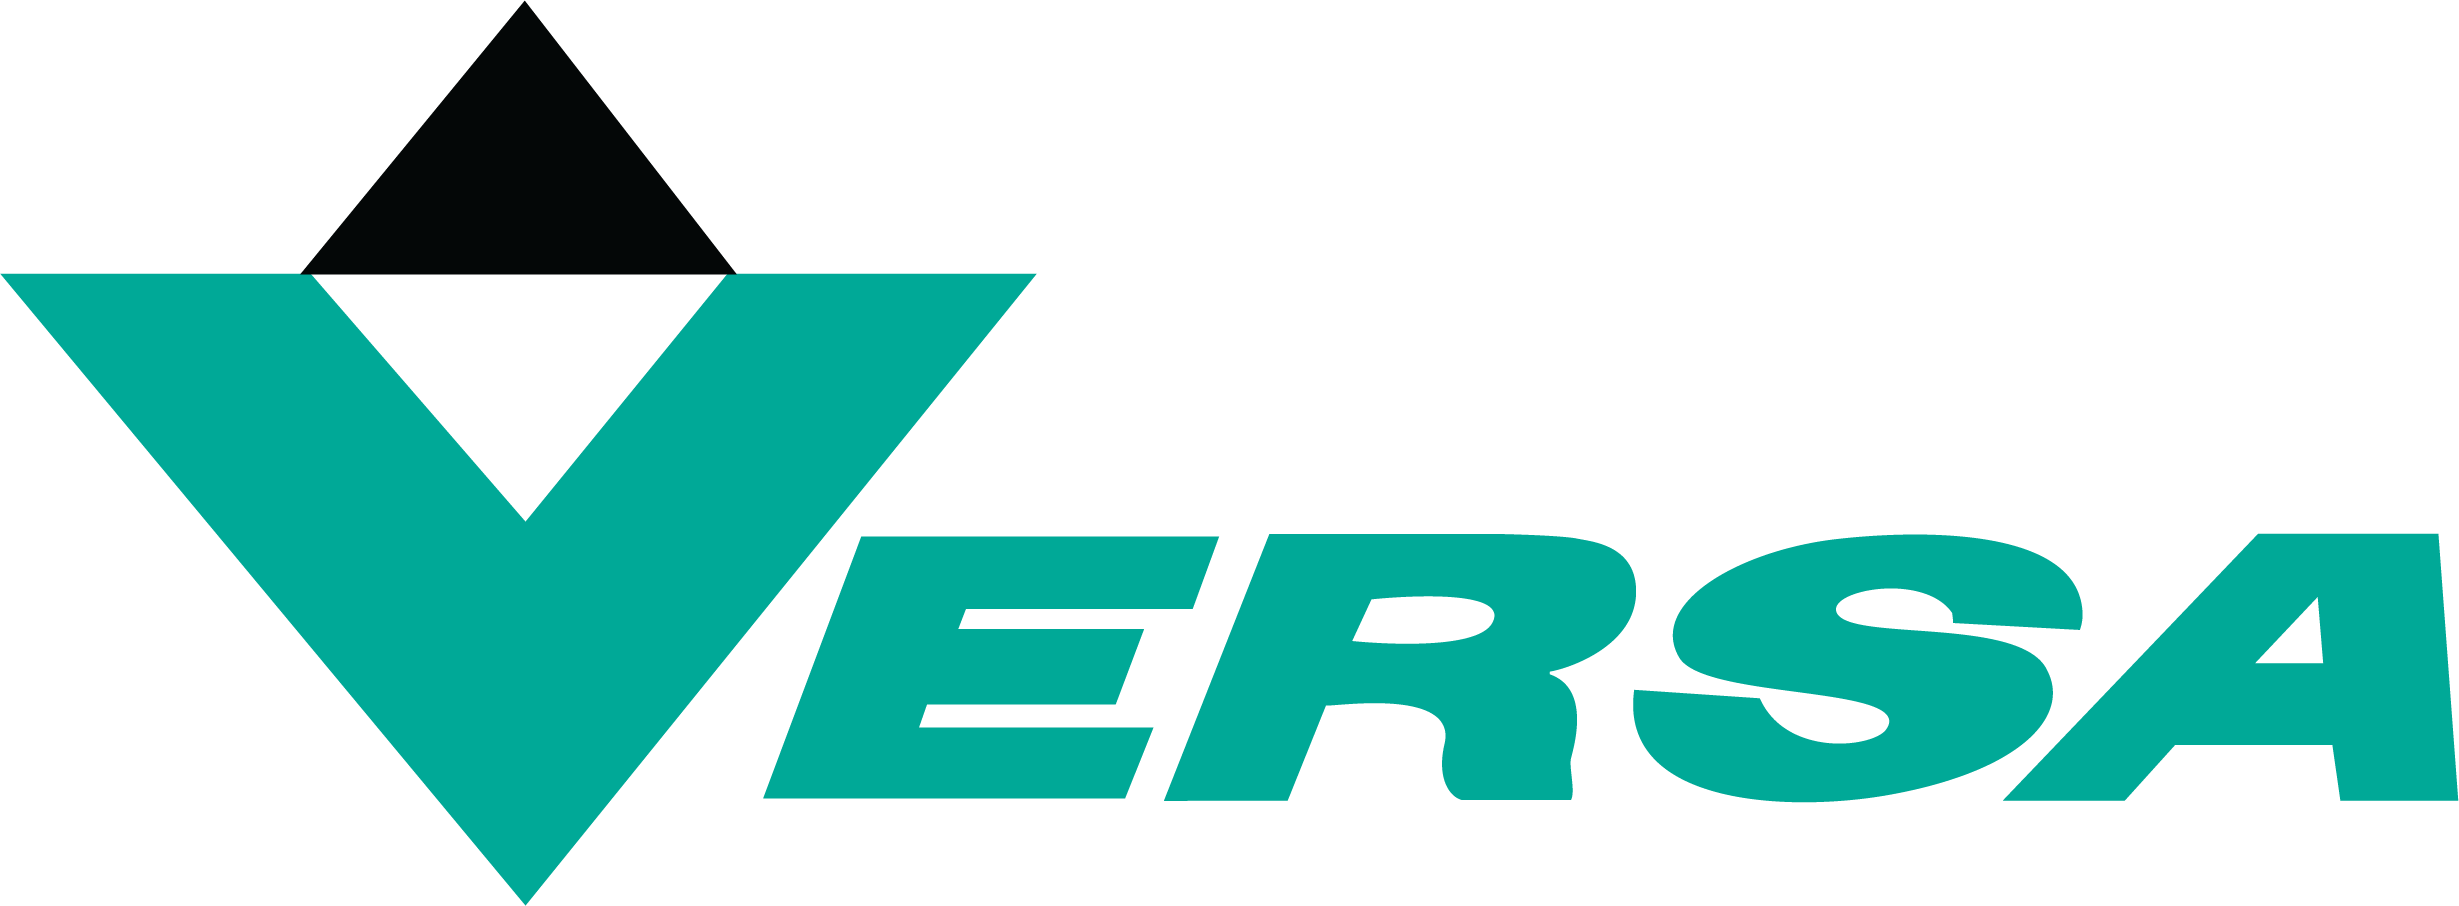 Versa Products Co., Inc.